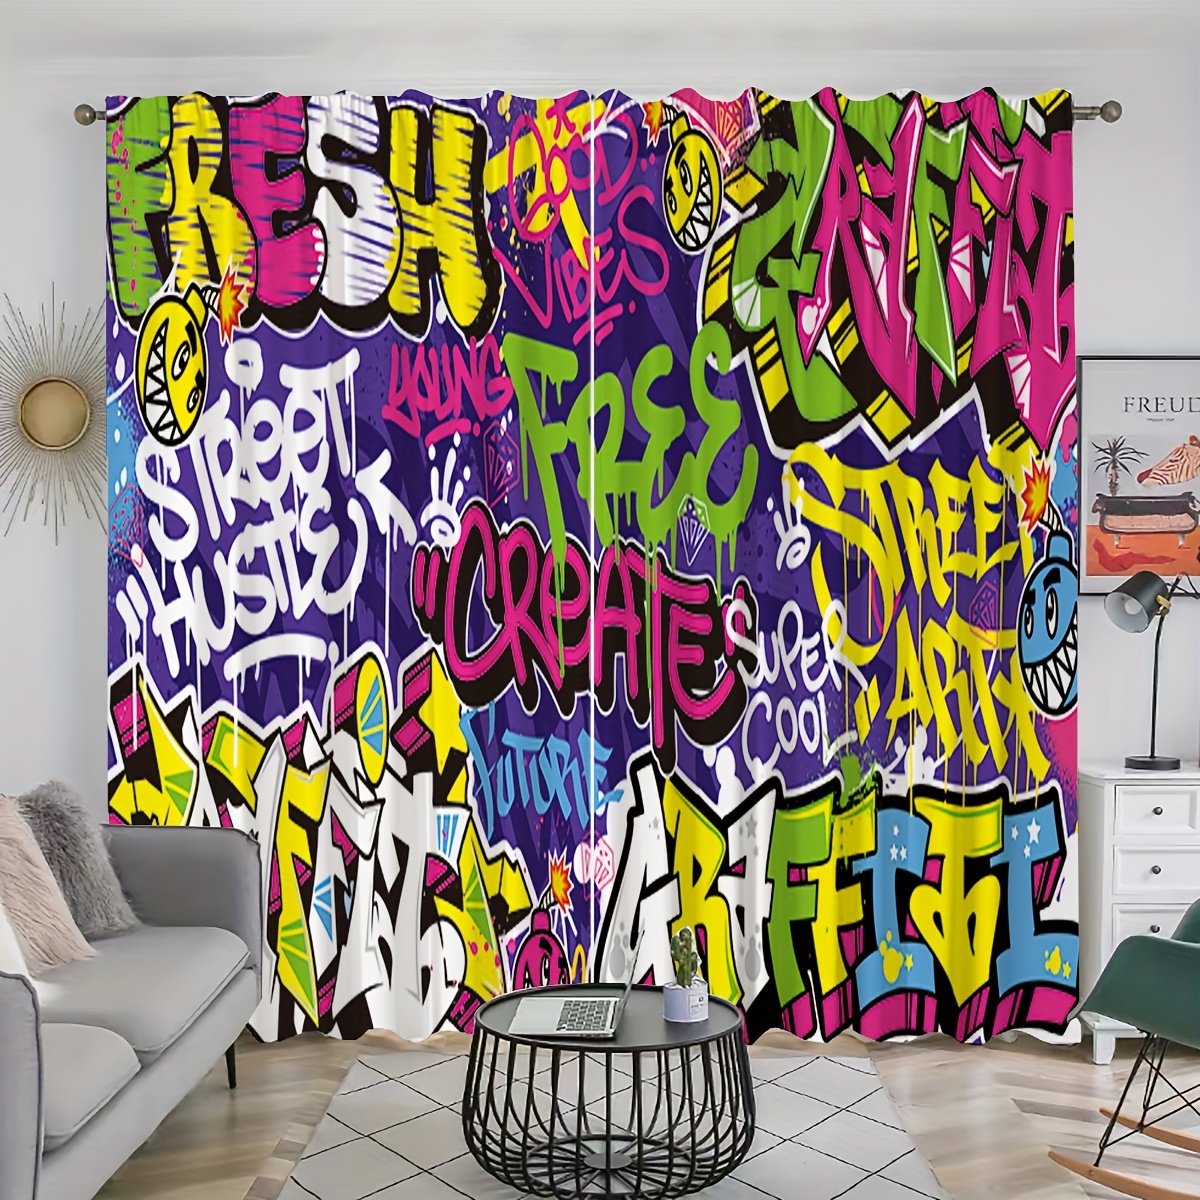 

Set Of 2 Contemporary Graffiti Art Print Curtain Panels - Machine Washable, Rod Pocket Hanging, Semi-sheer Polyester For Living Room, Bedroom, Office, Entryway - Decorative Street Art Curtains